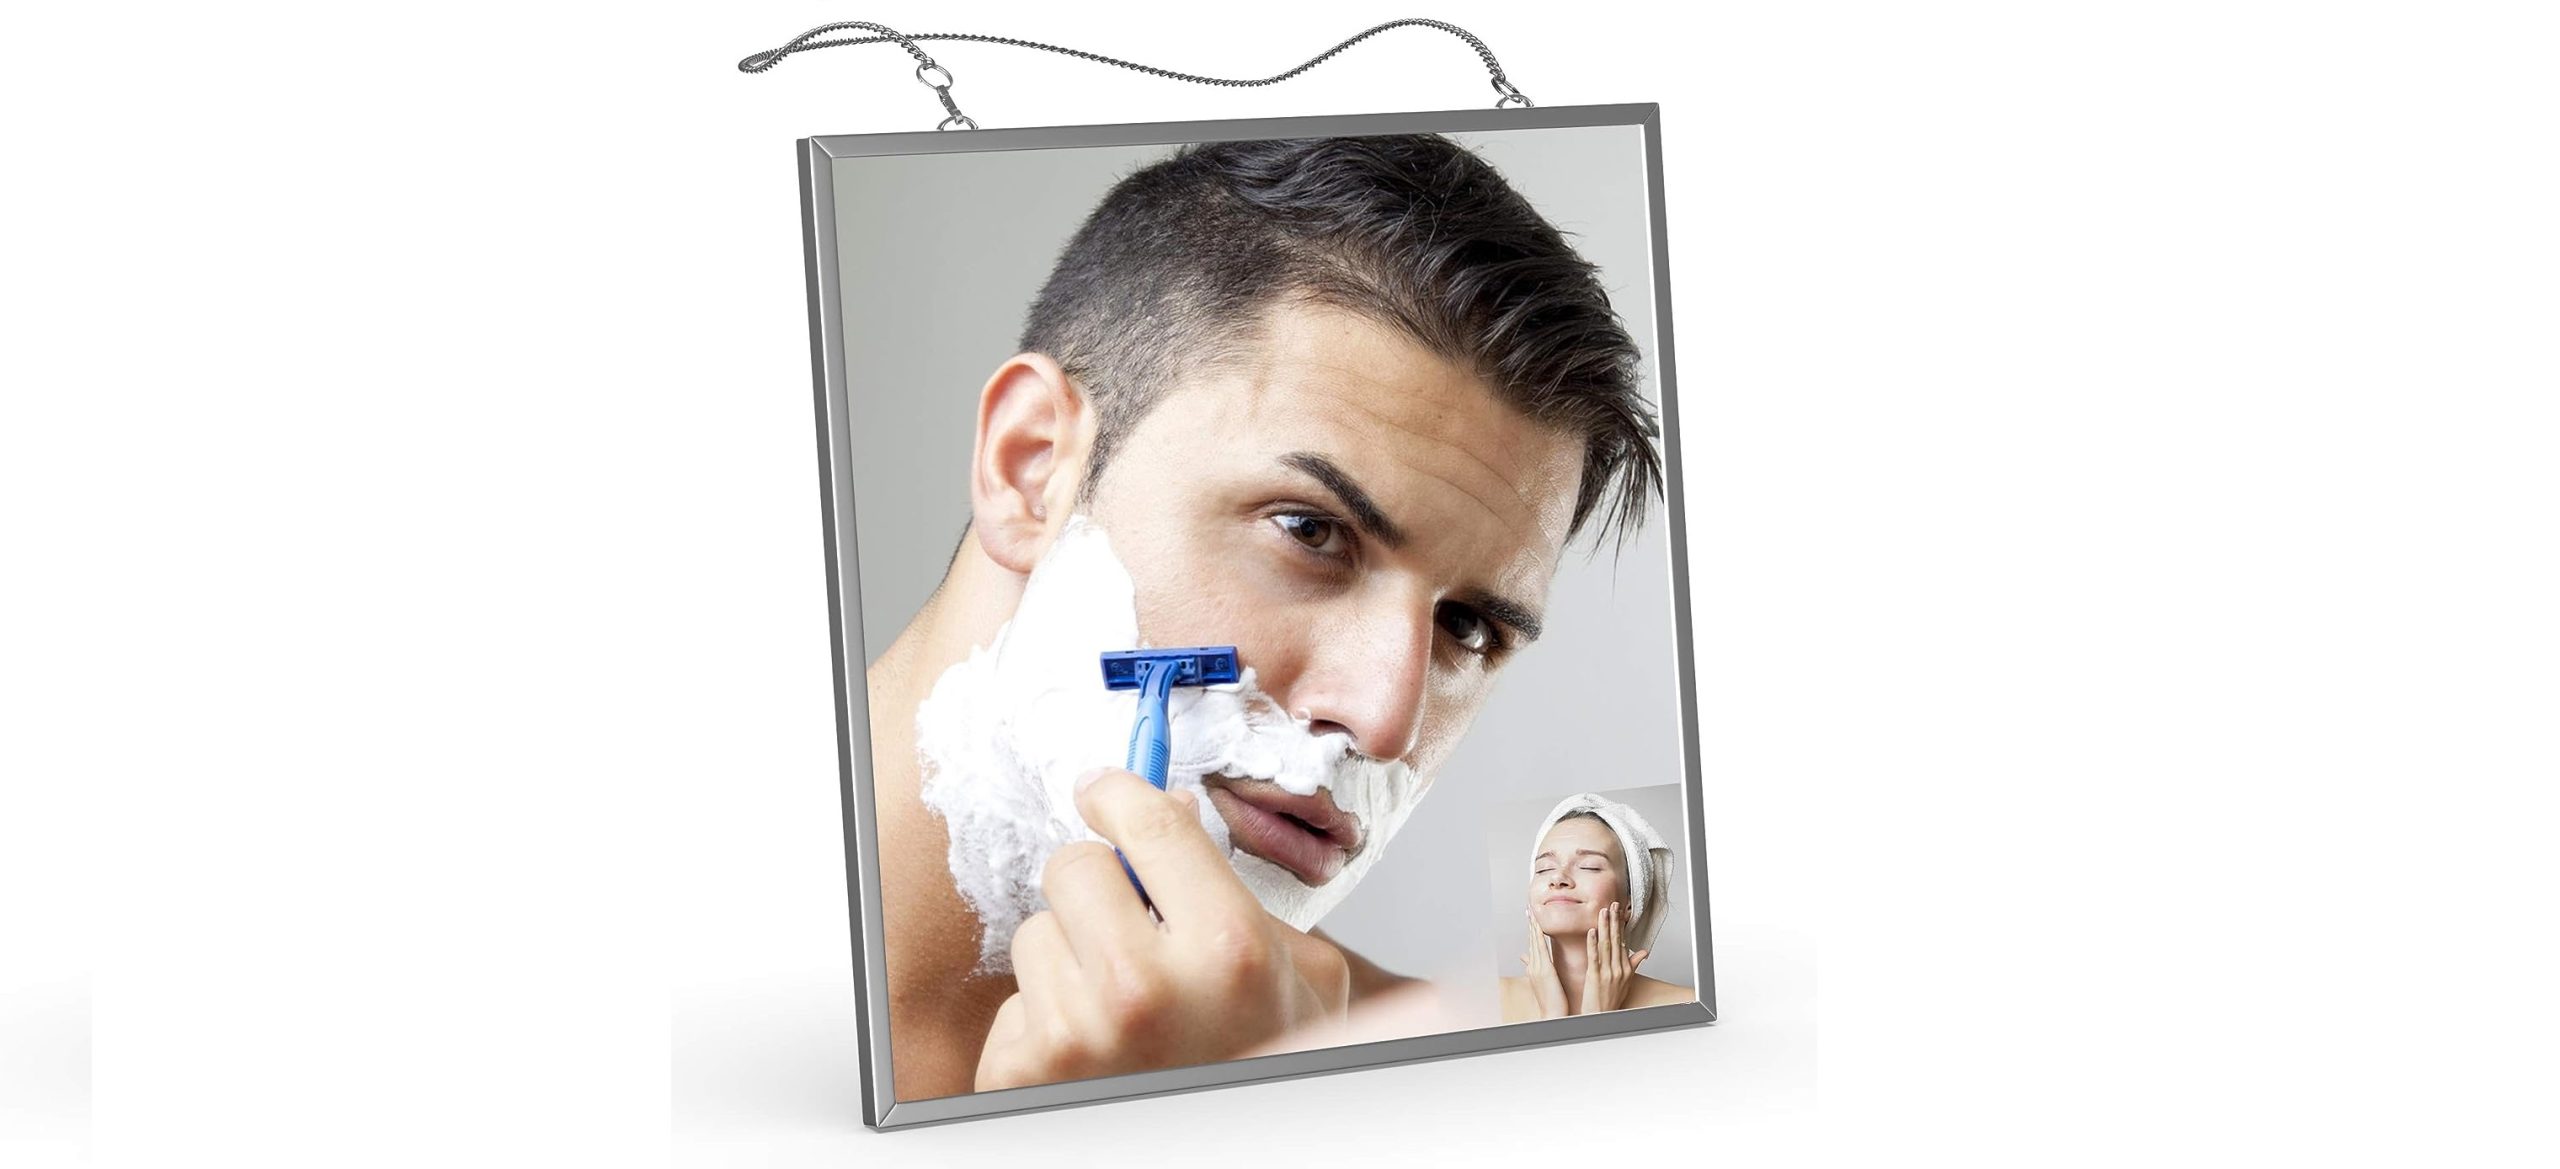 Fogless Shower Mirror - It could be a perfect christmas gift for men in 2023